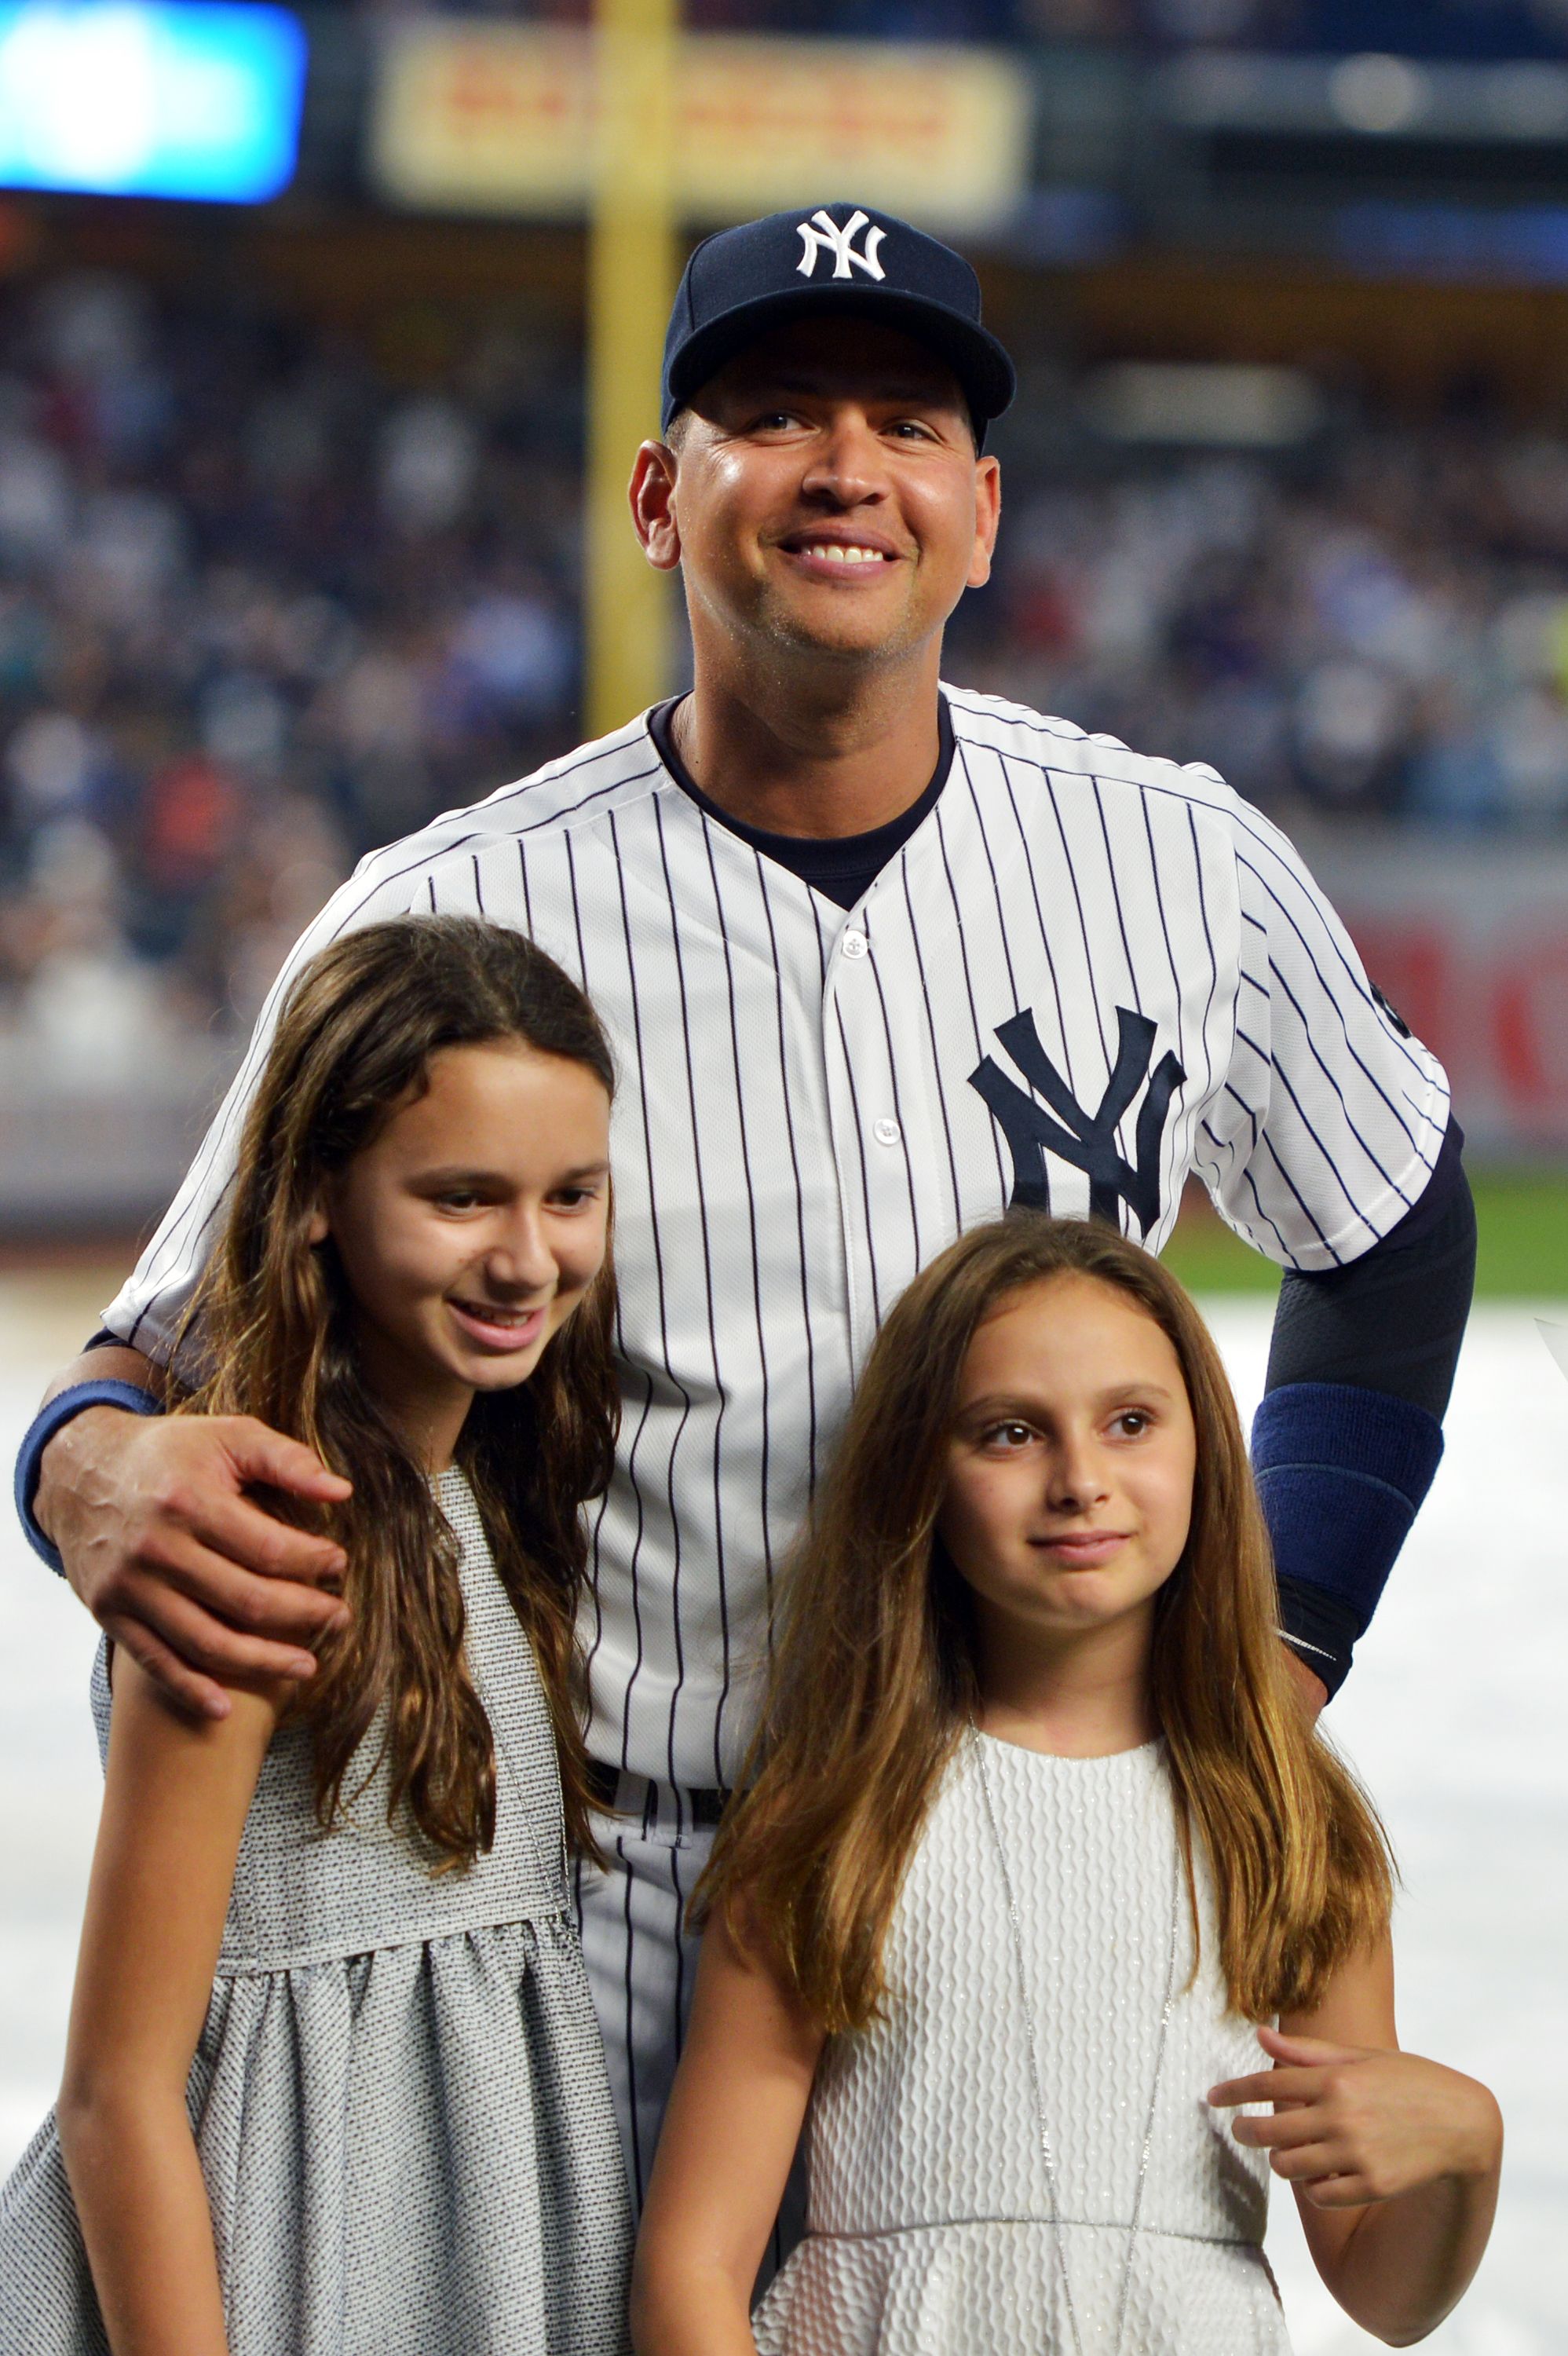  Alex Rodriguez with his daughters Natasha and Ella during a presentation in his honor before the game against the Tampa Bay Rays at Yankee Stadium on August 12, 2016 in New York City. | Source: Getty Images